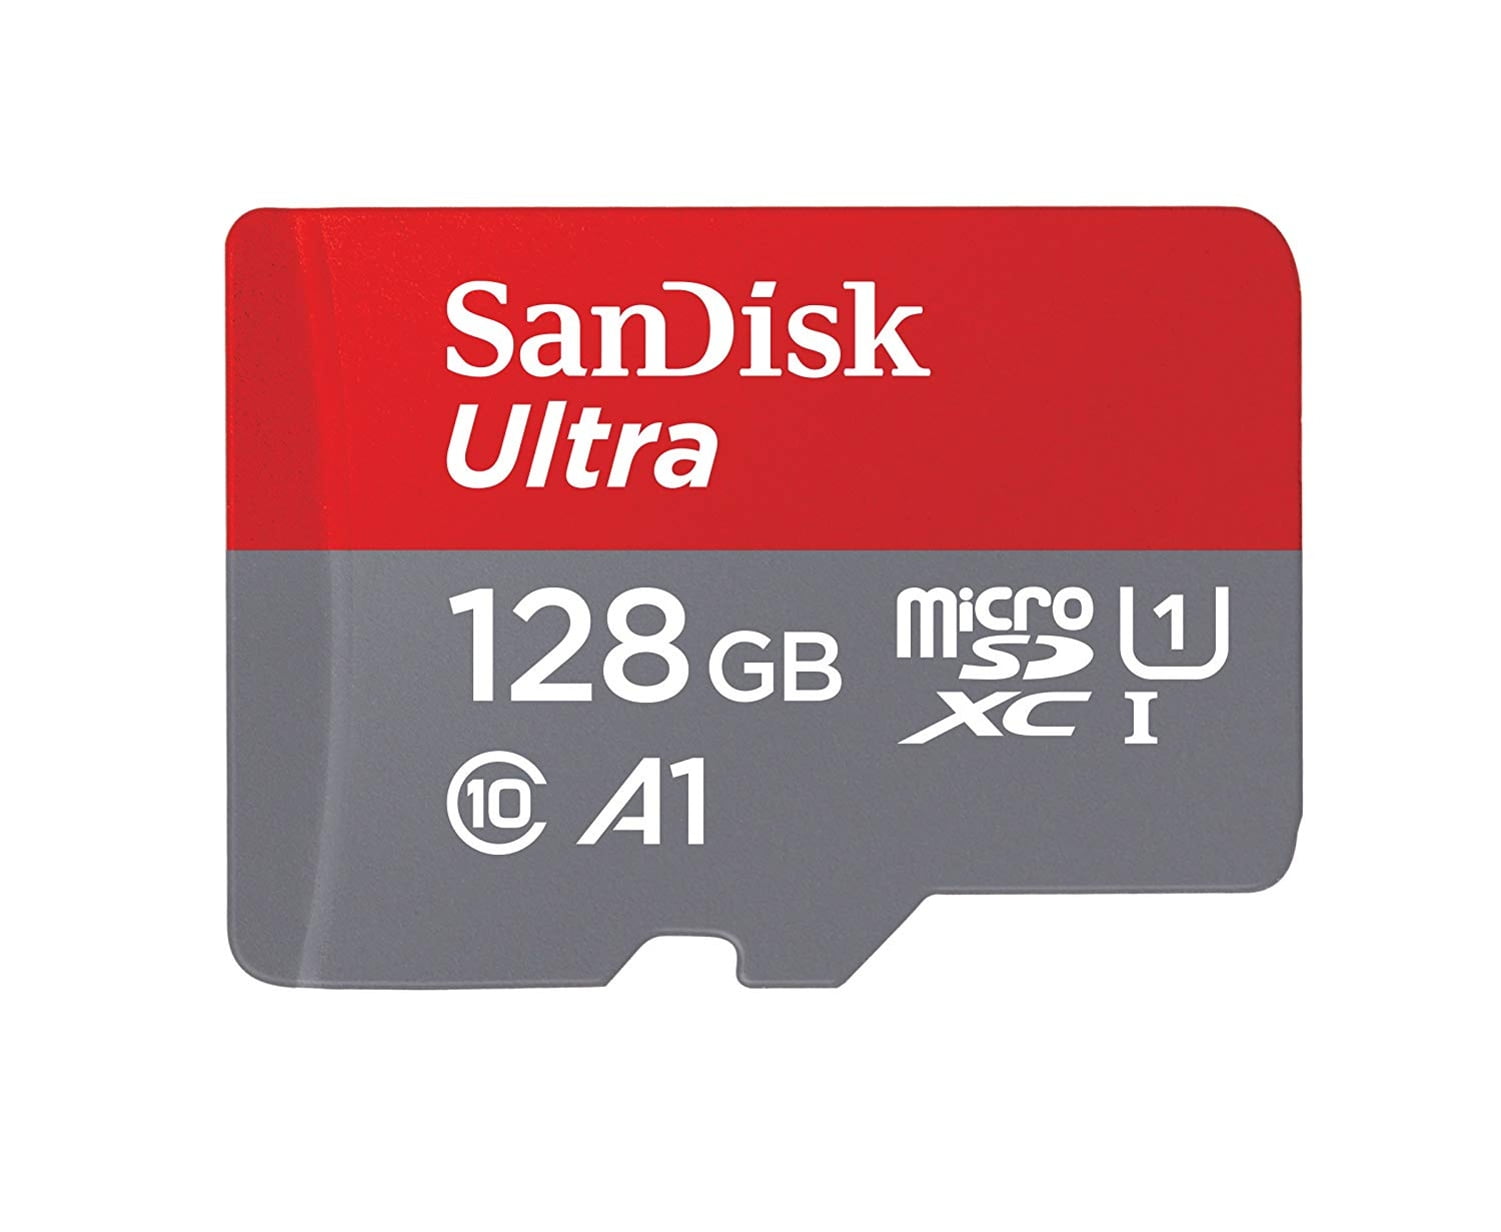 Sandisk Ultra 128GB Memory Card for OnePlus Nord N100/N10 5G Phones - High  Speed MicroSD Class 10 MicroSDXC V3L Compatible With OnePlus Nord N100/N10  